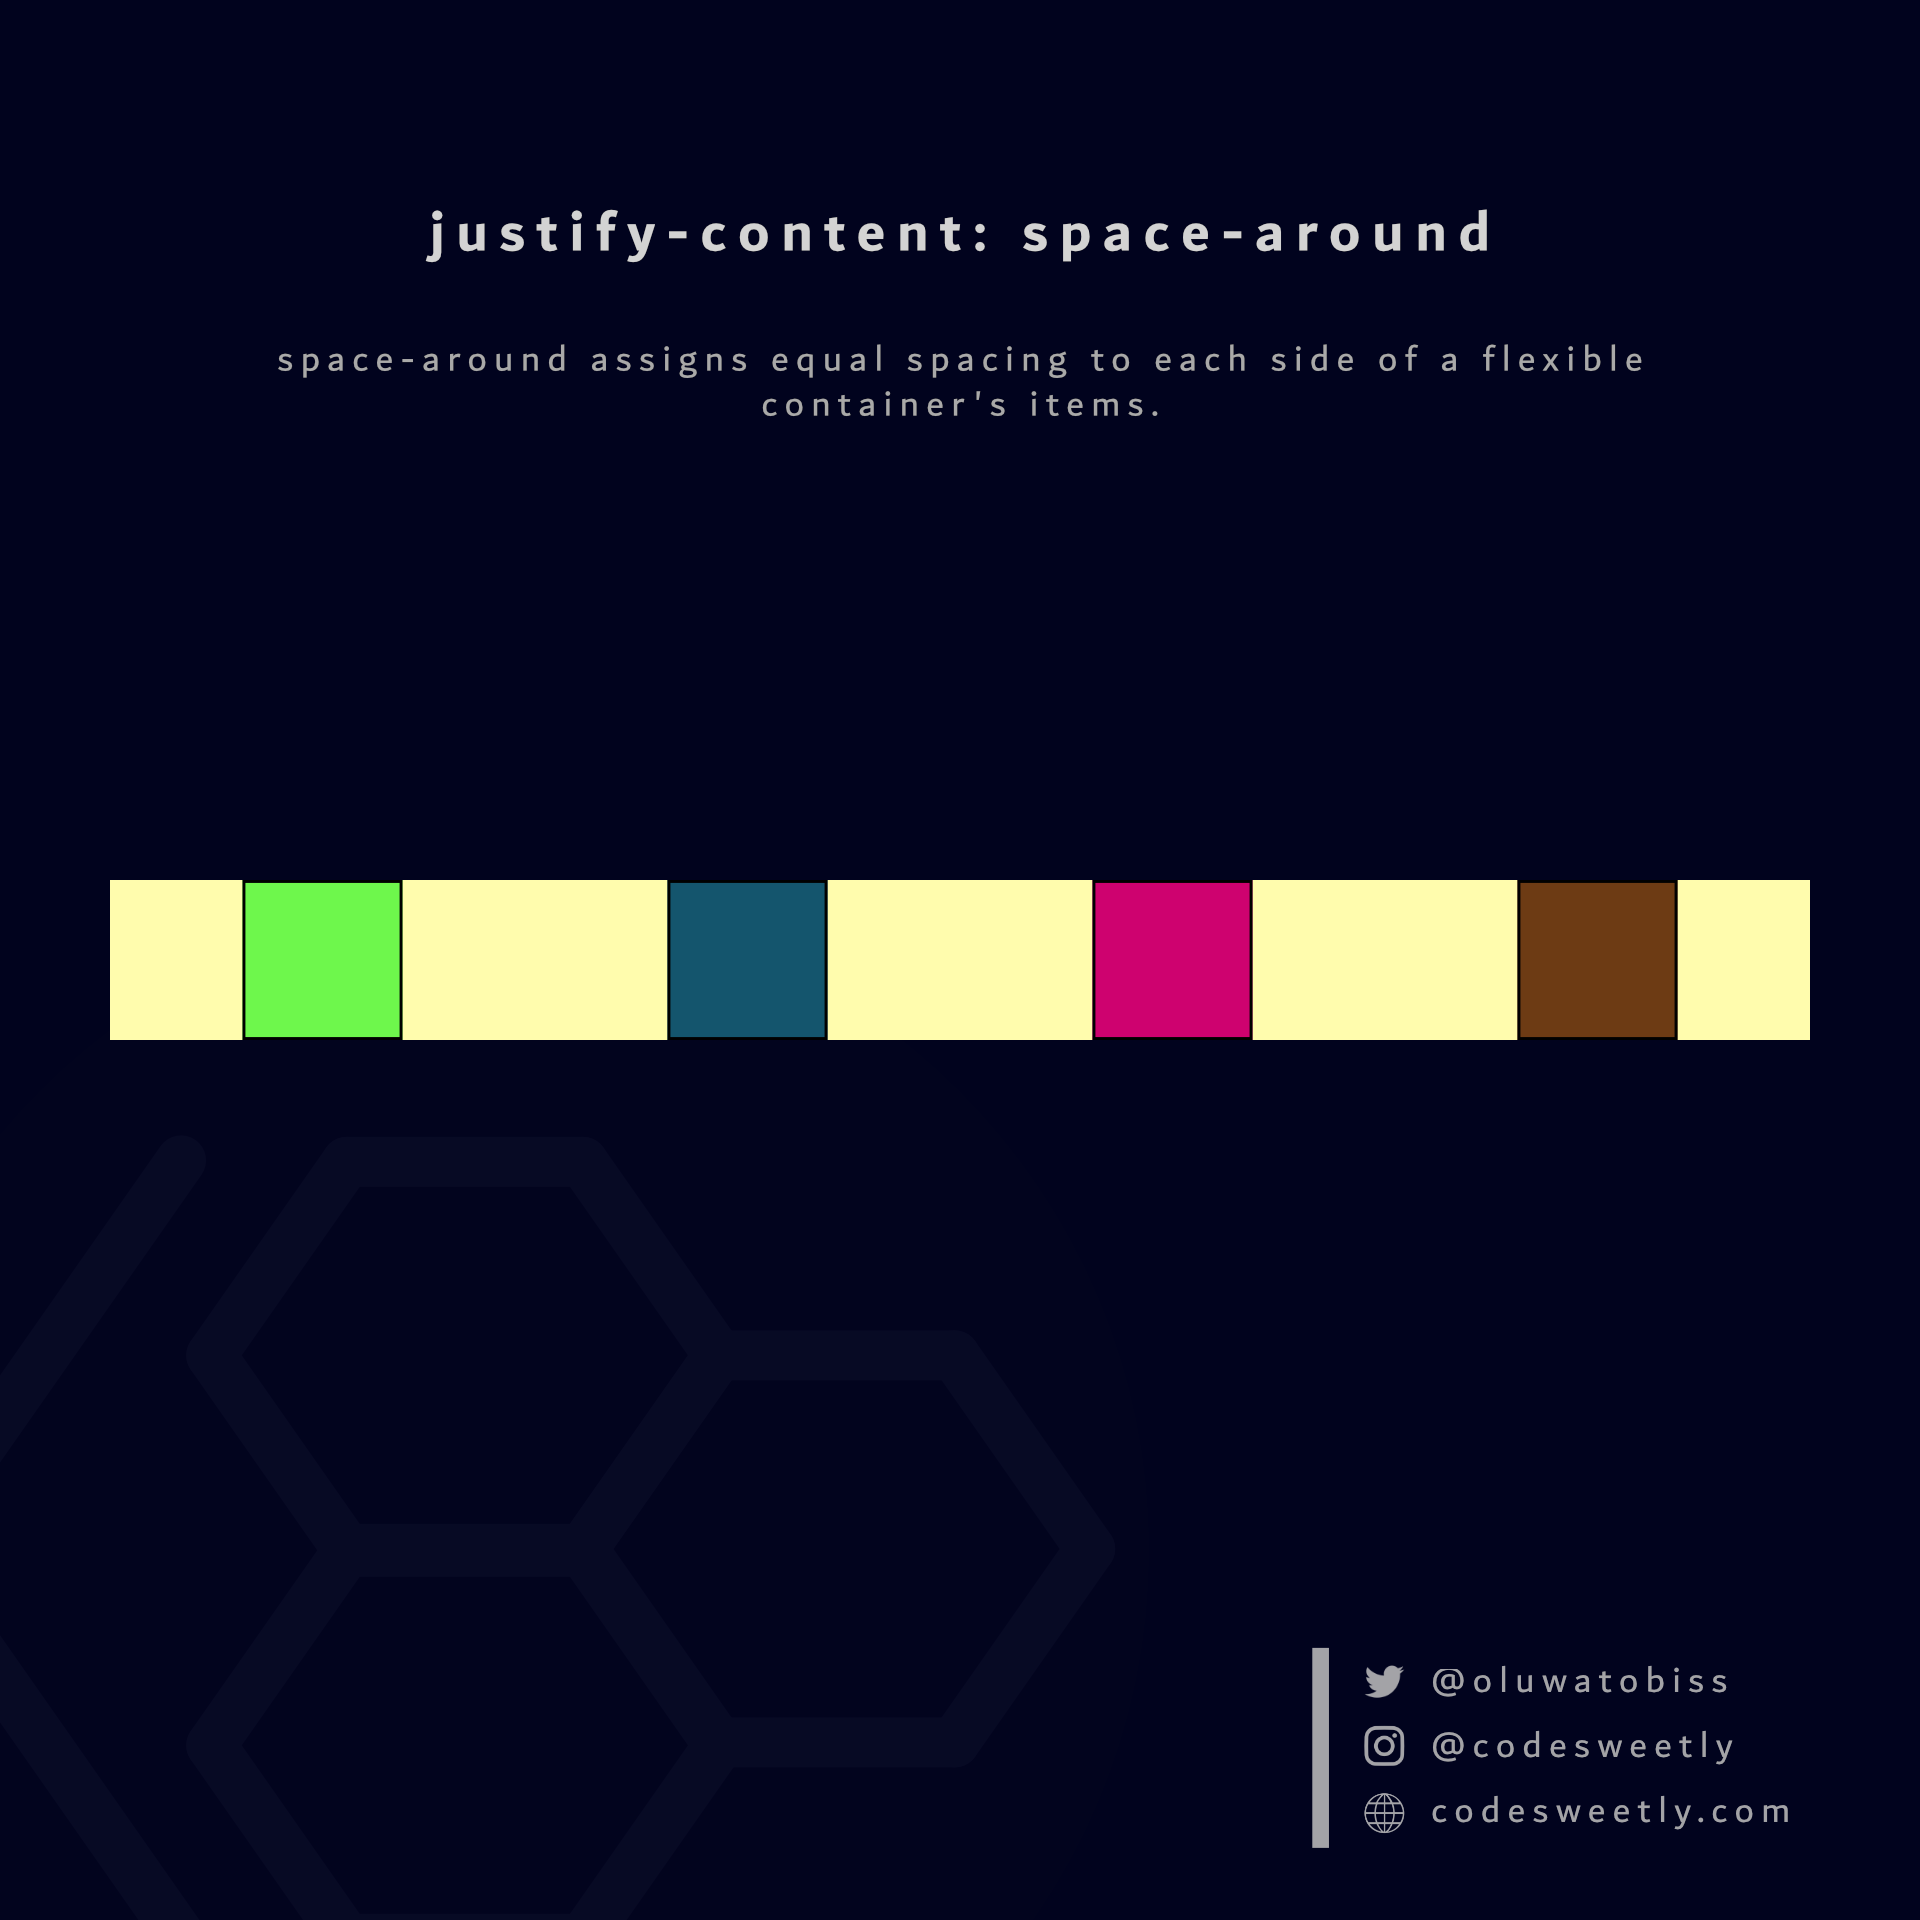 justify-content's space-around value assigns equal spacing to each side of the flexbox's items